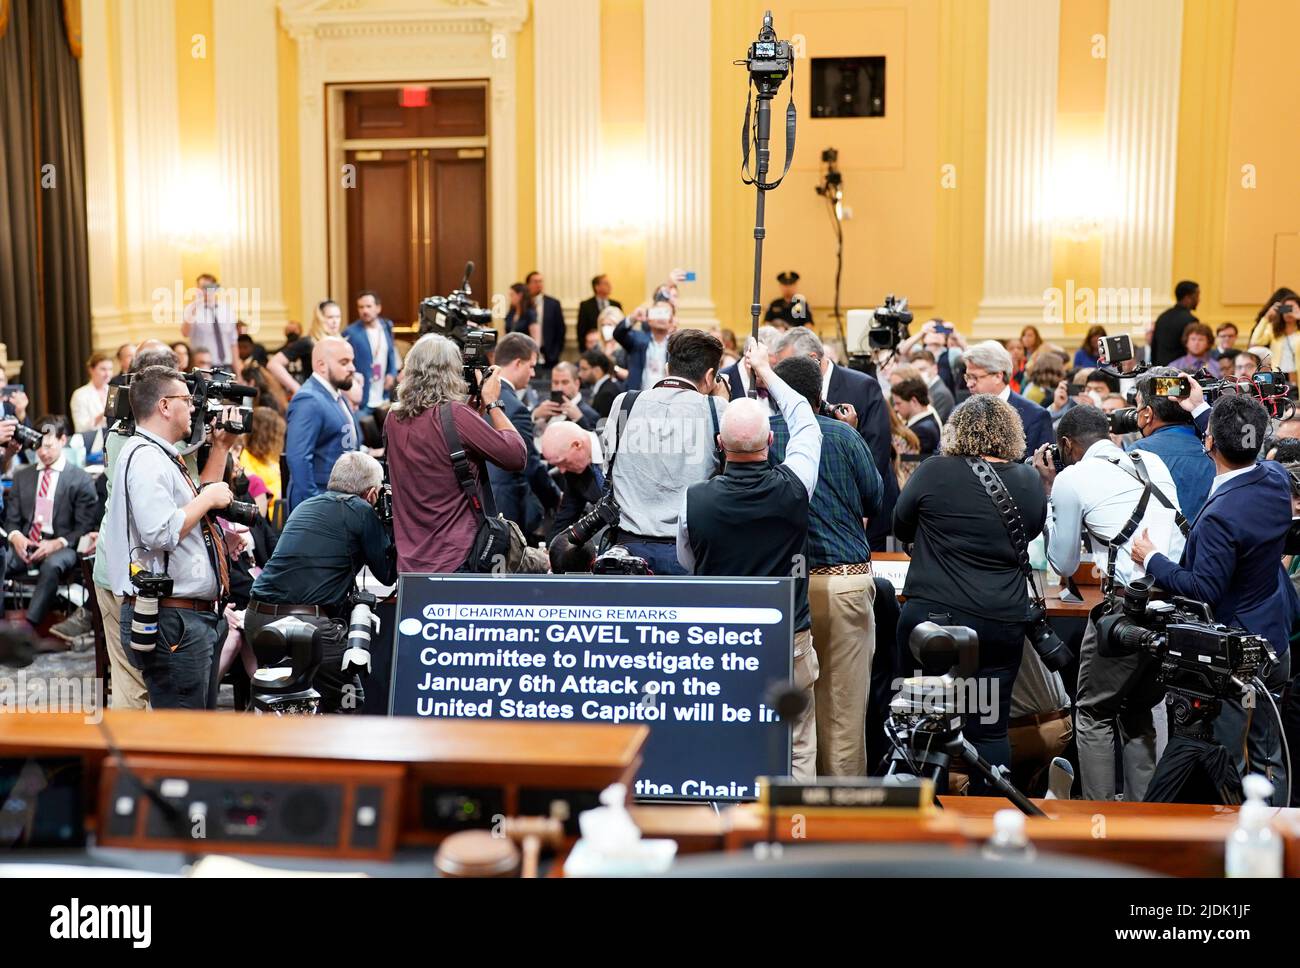 United States House Select Committee investigating the Jan. 6 attack - Photographers take pictures of the witnesses arriving during the hearing on Capitol Hill, Tuesday, June, 21, 2022. Credit: Doug Mills/Pool via CNP /MediaPunch Stock Photo